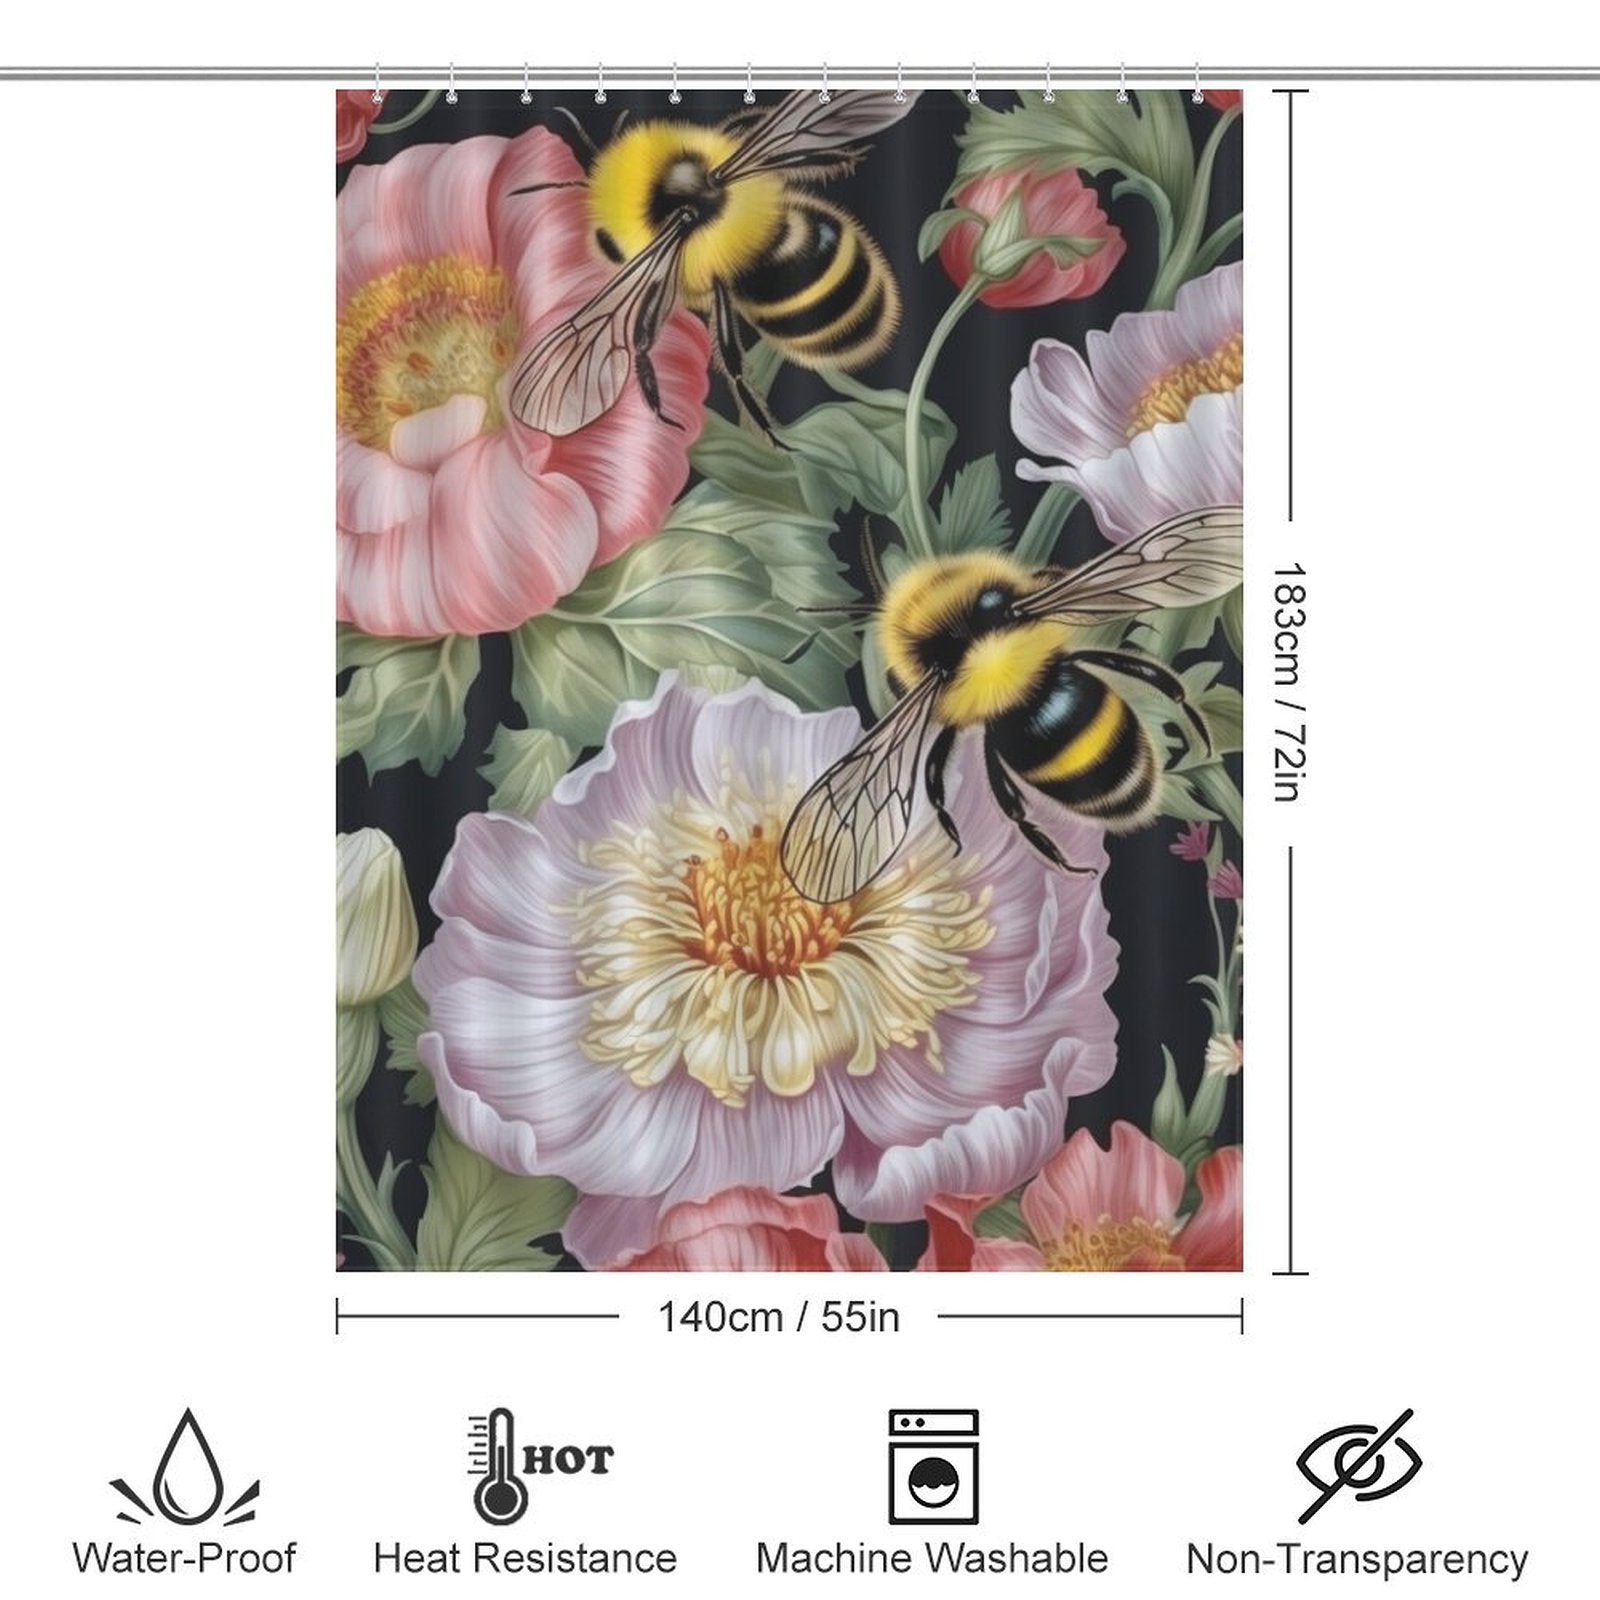 Cheerful Bumble Bee Shower Curtain